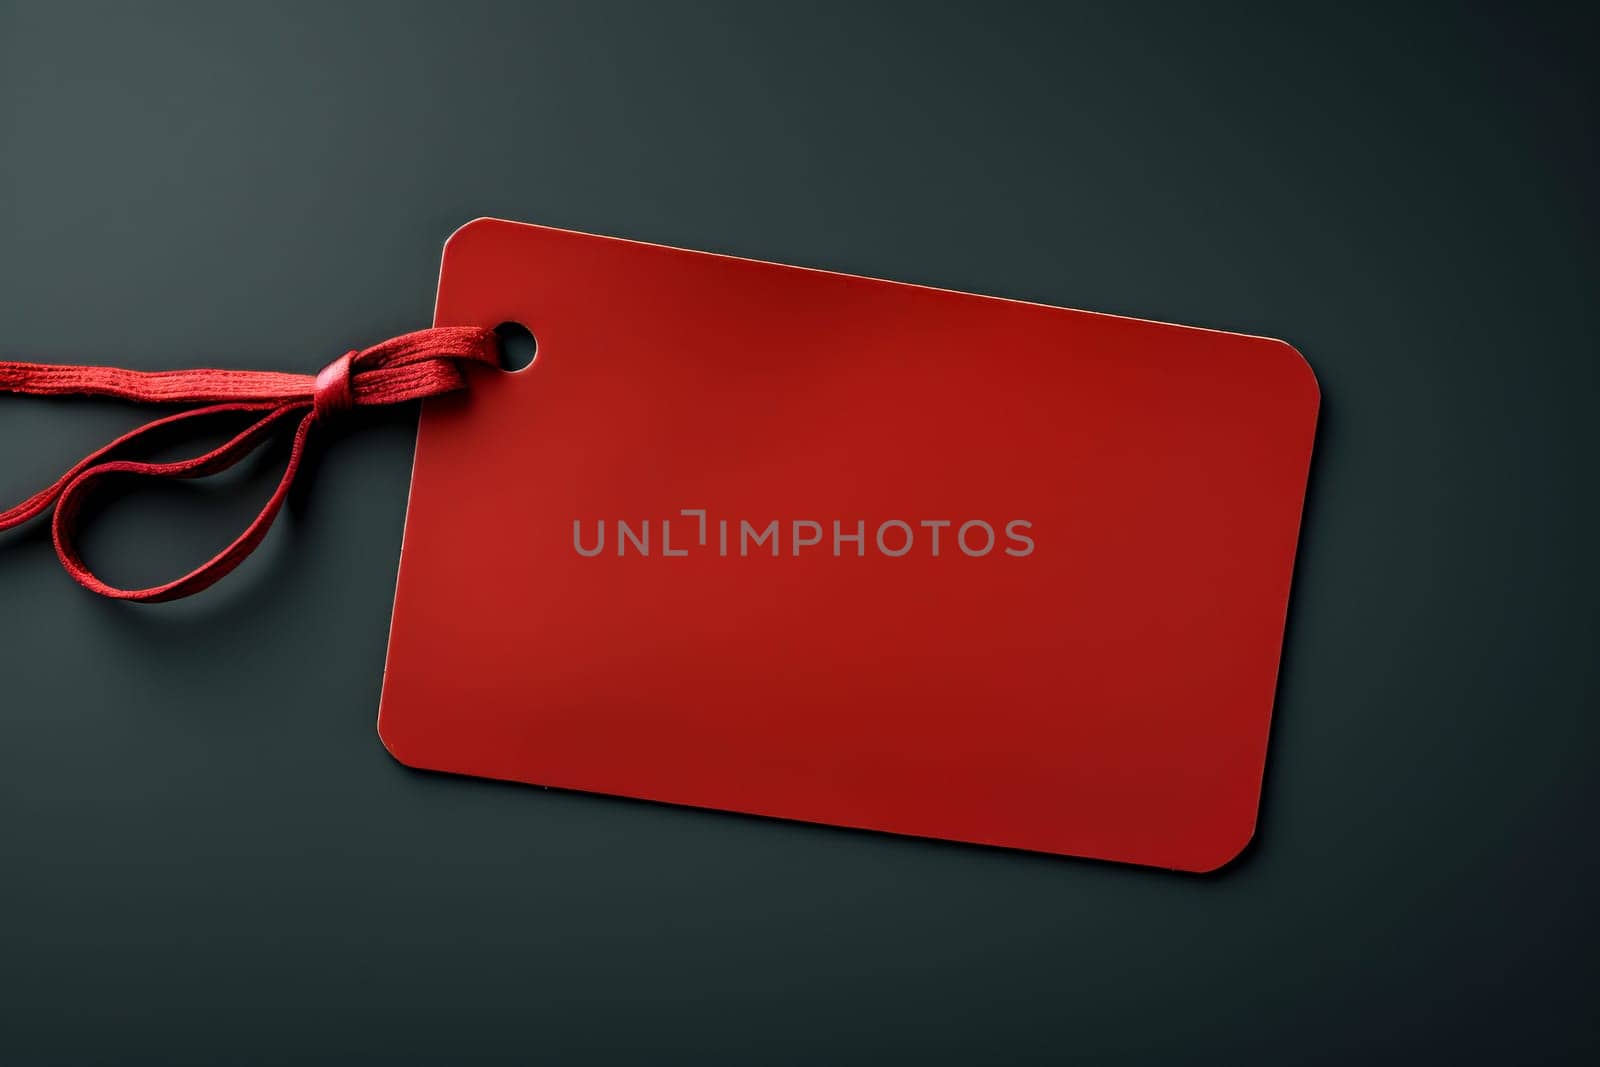 Red empty price tag on black or dark background. Black Friday concept, template copyspace.